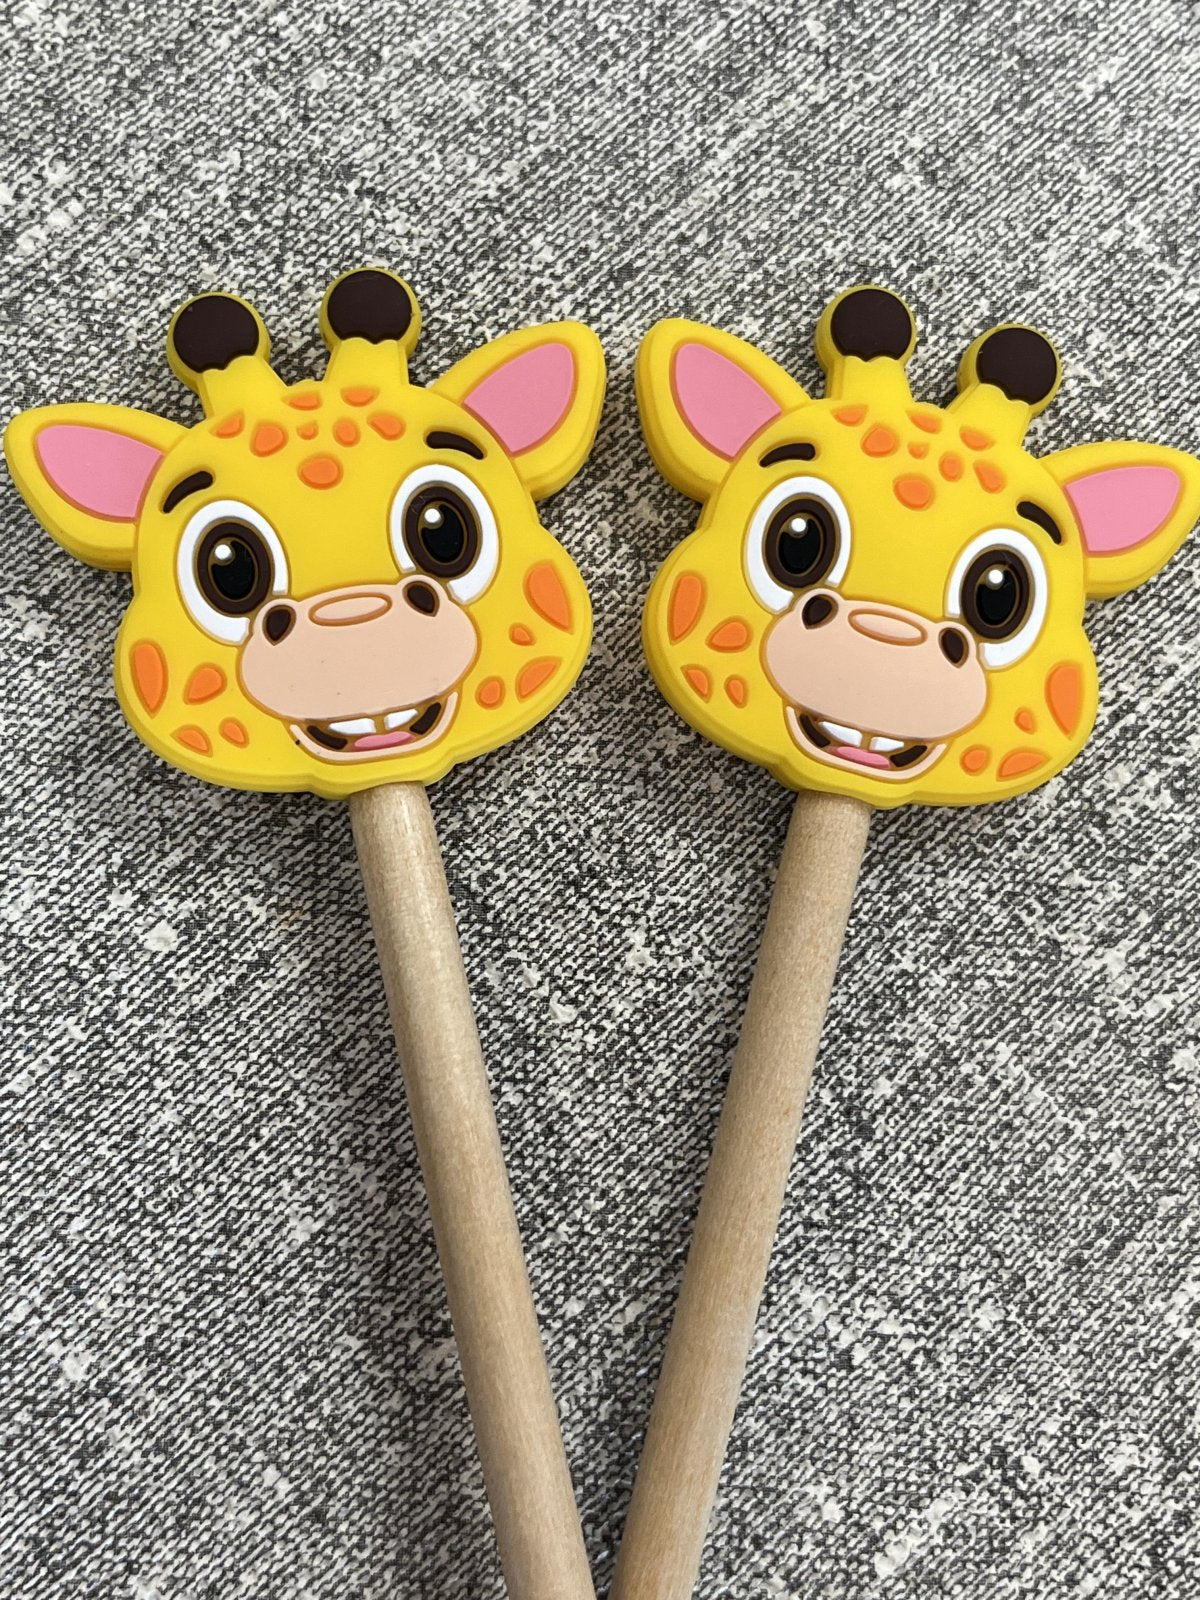 Stitch Stoppers (animals/creatures/characters)